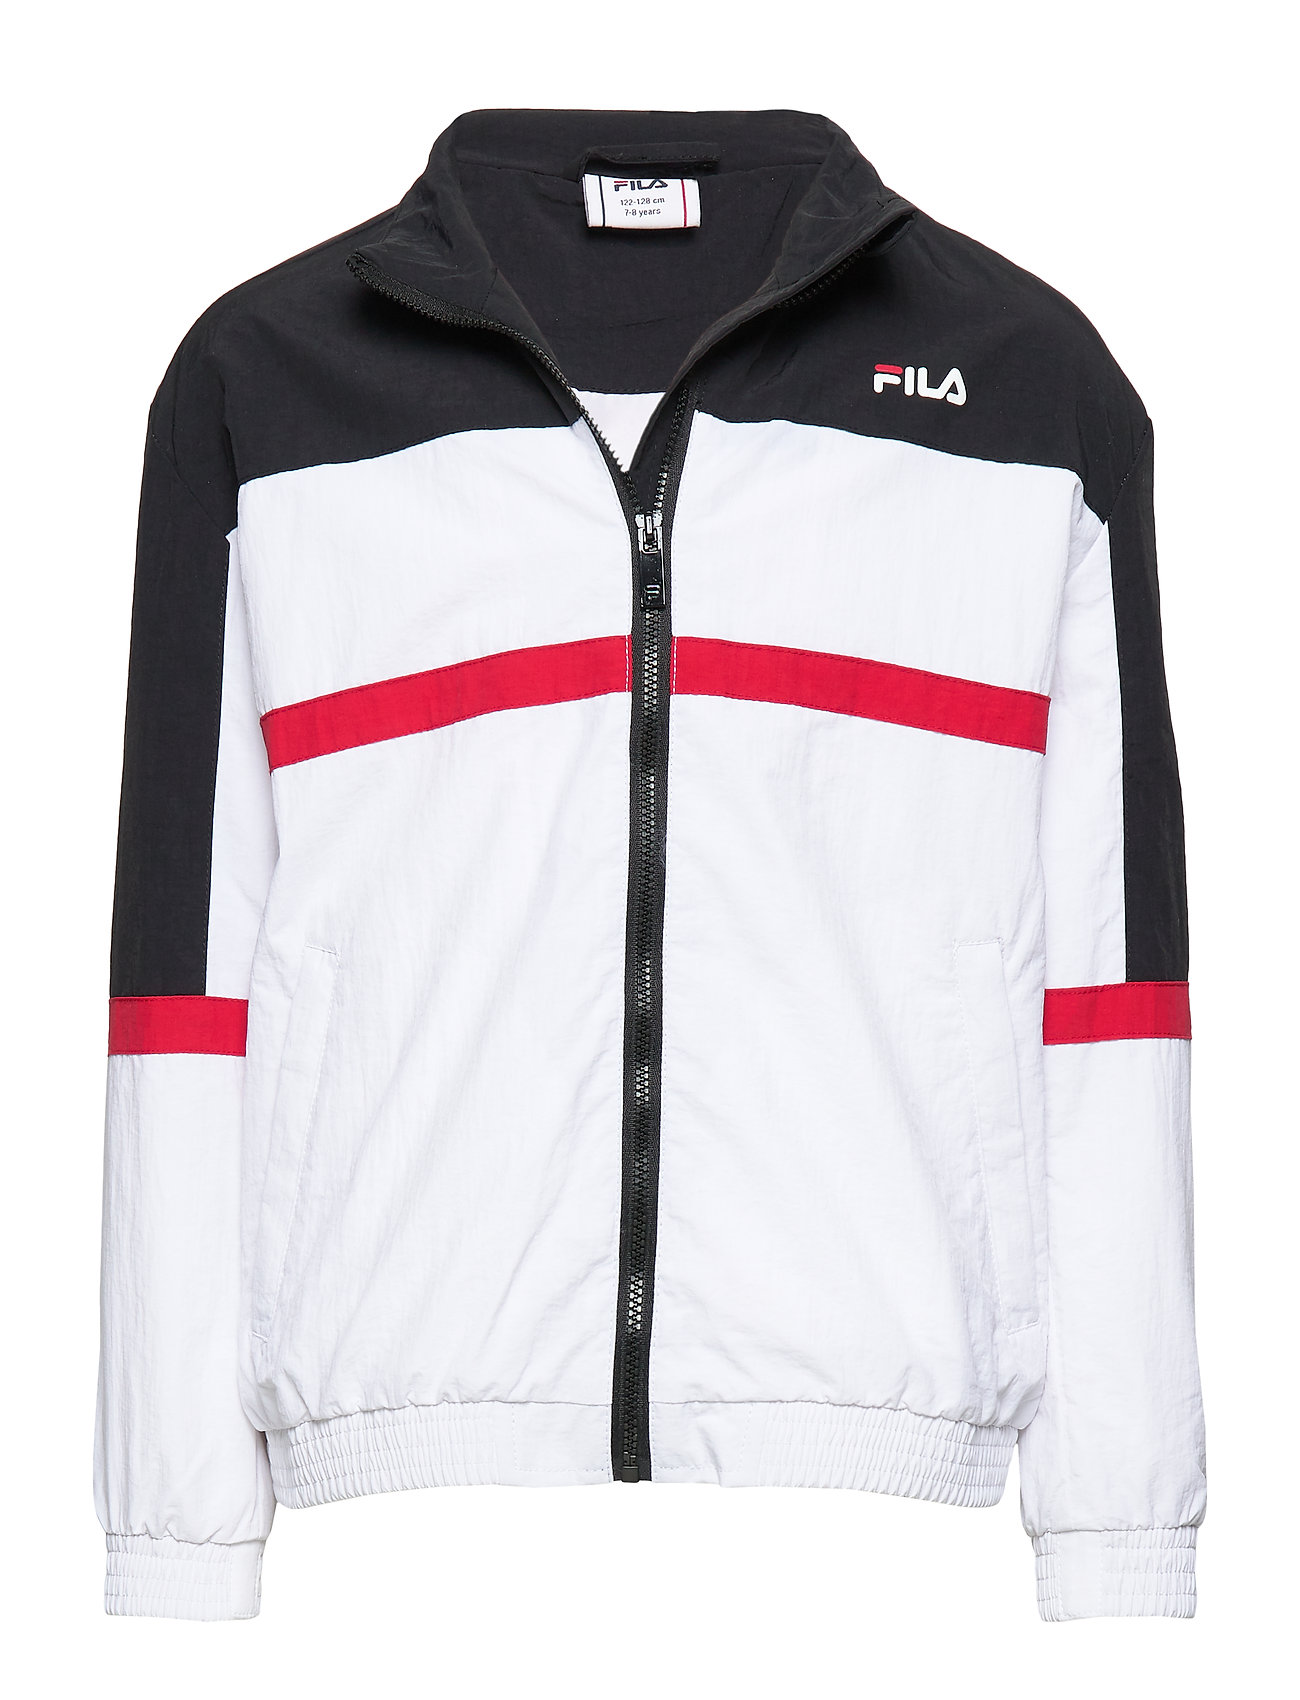 fila red and black jacket